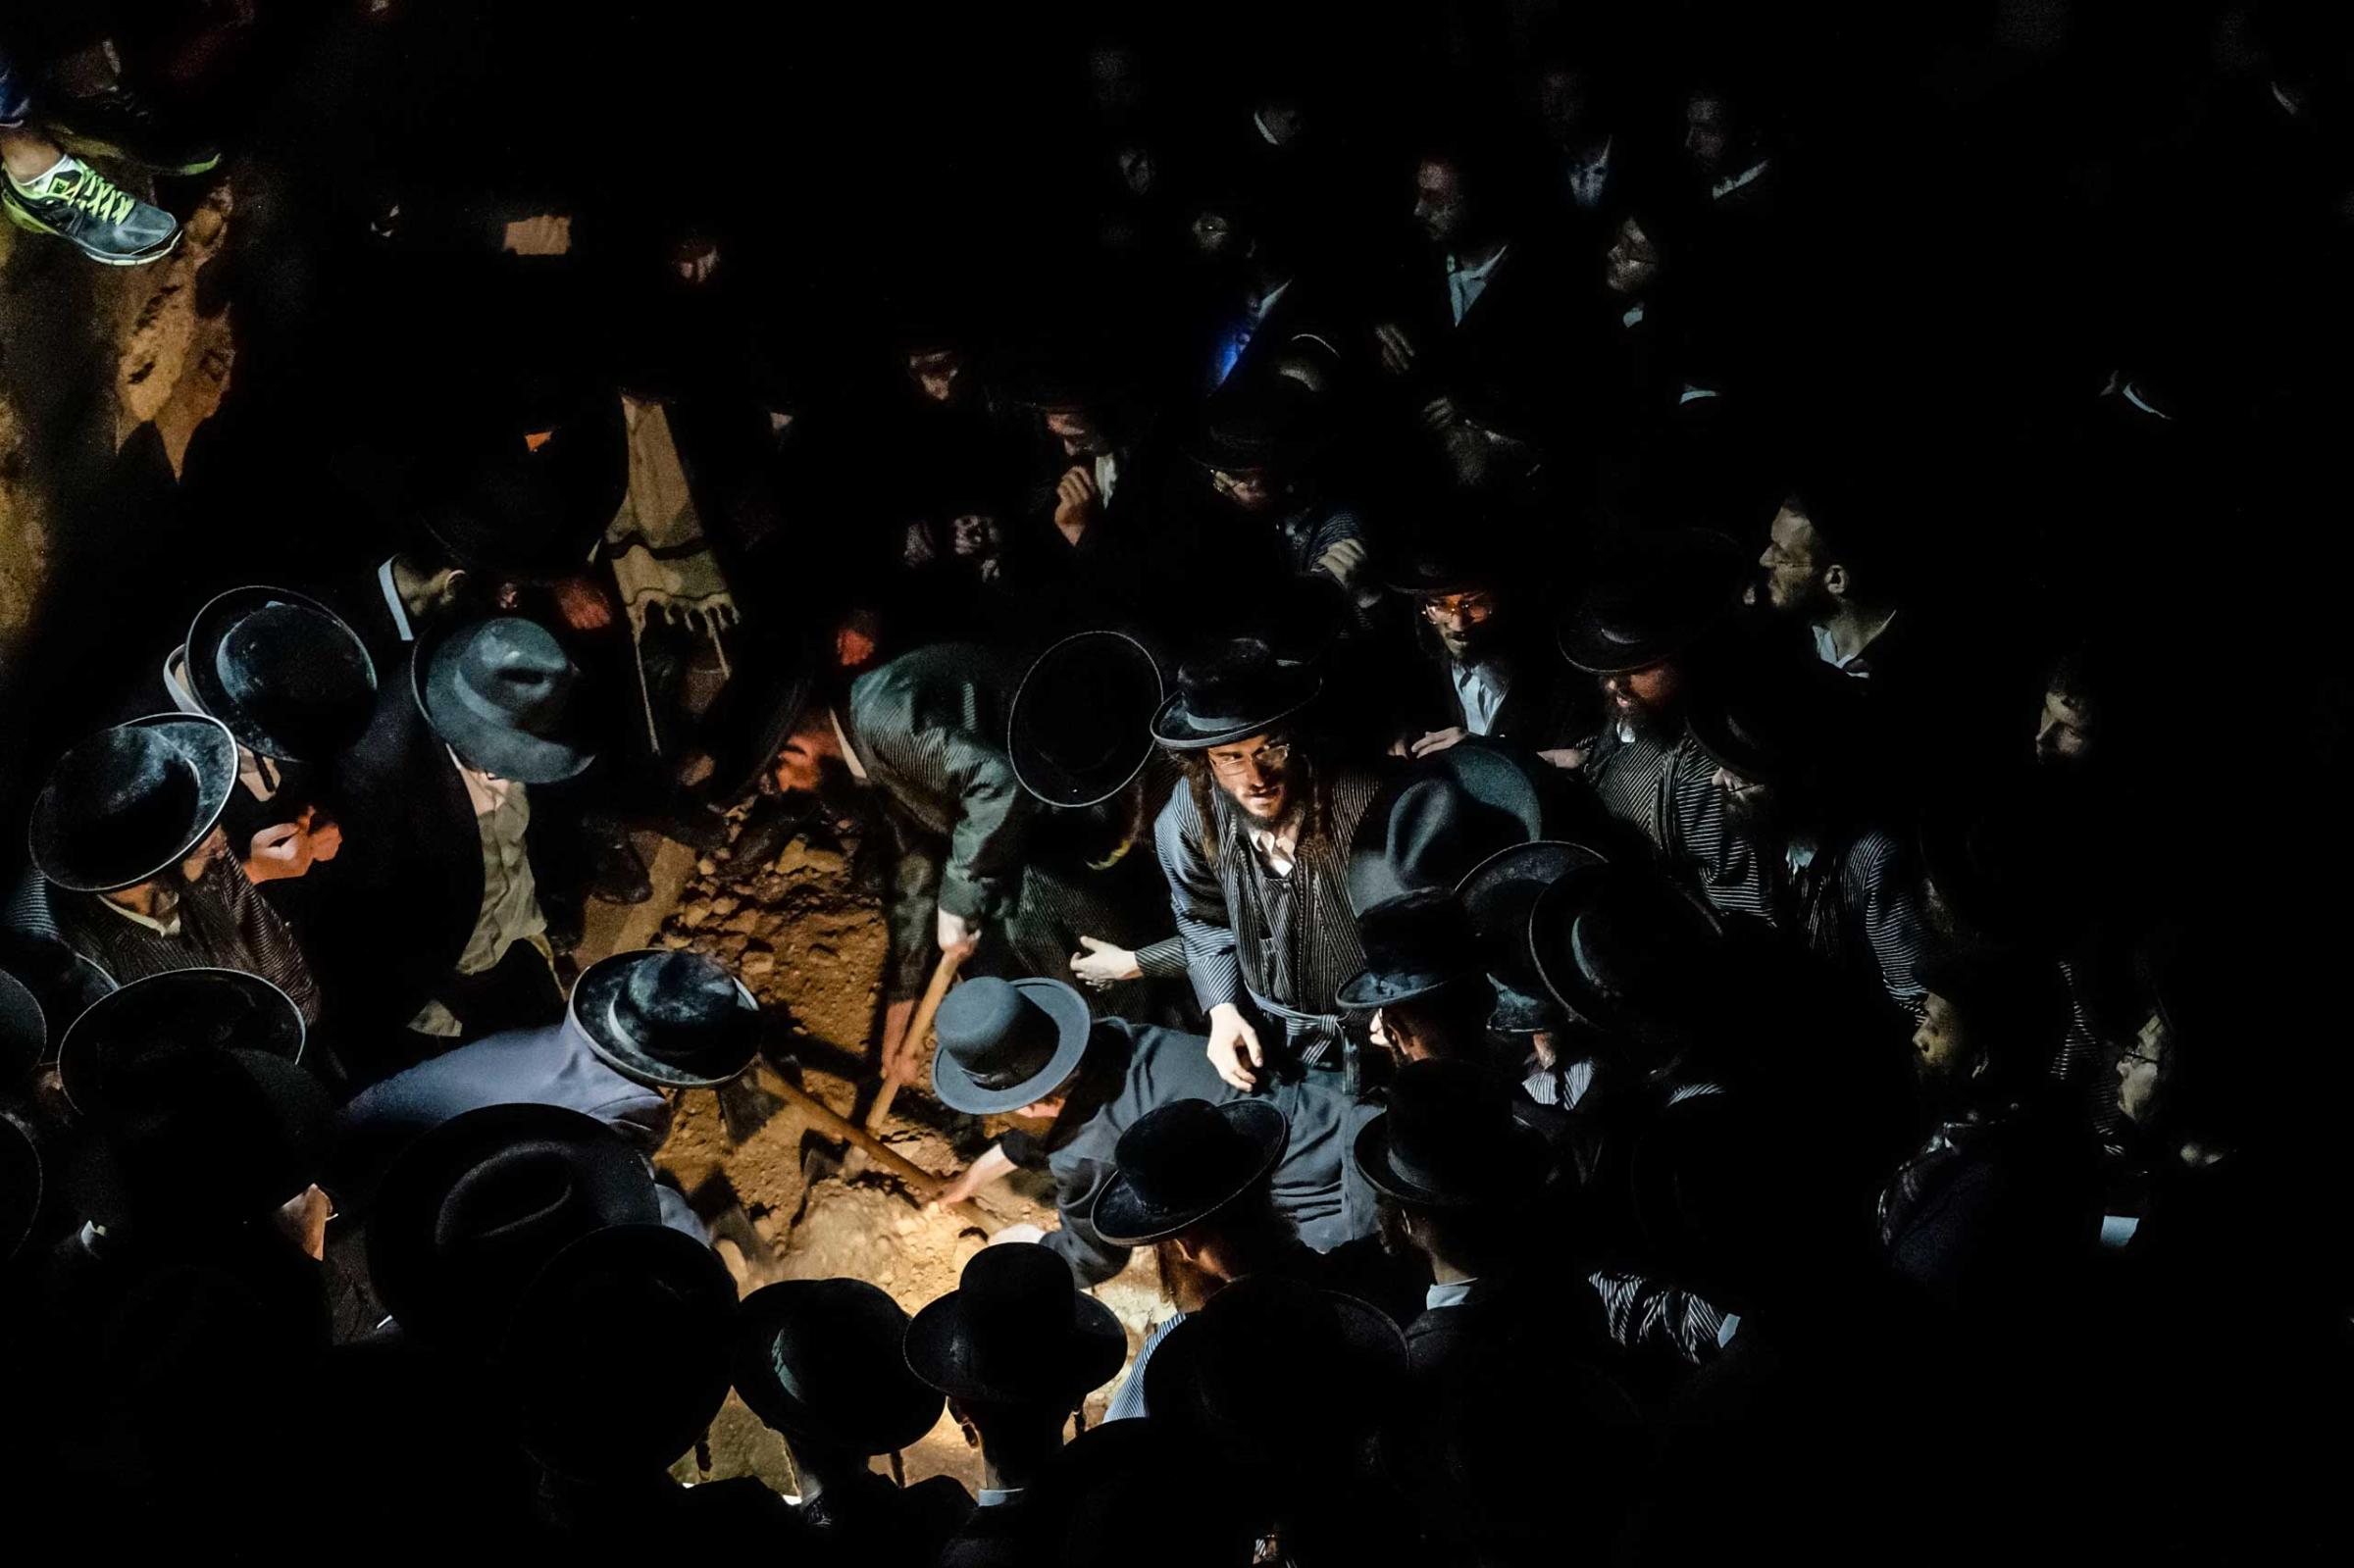 TIME LightBox: Top 100 Photos of 2014The funeral of Avraham Walz, 29, killed in an attack earlier that day by a Palestinian in a stolen digger in Jerusalem Aug. 5, 2014.